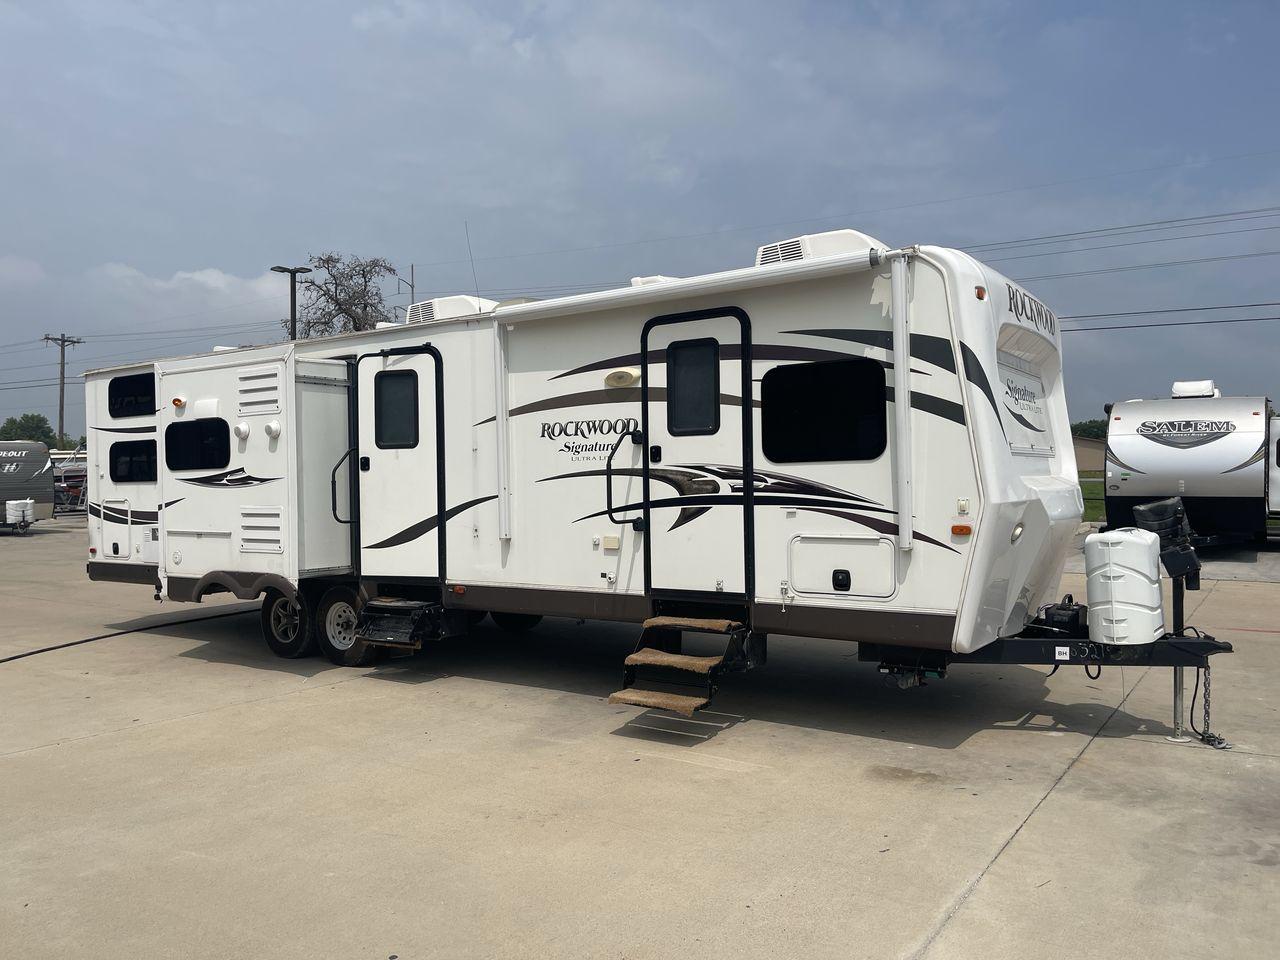 2015 WHITE FOREST RIVER ROCKWOOD 8327SS (4X4TRLH24F1) , Length: 35.25 ft. | Dry Weight: 7,694 lbs. | Gross Weight: 9,150 lbs. | Slides: 4 transmission, located at 4319 N Main Street, Cleburne, TX, 76033, (817) 221-0660, 32.435829, -97.384178 - This 2015 Forest River Rockwood 8327SS travel trailer measures 35.25 ft. It has a width of 8 ft and a height of 9.83 ft. The dry weight is 7,694 lbs, and the payload capacity is 1,456 lbs. It has a GVWR of 9,150 lbs and a hitch weight of 1,035 lbs. It is constructed out of aluminum body material and - Photo #24